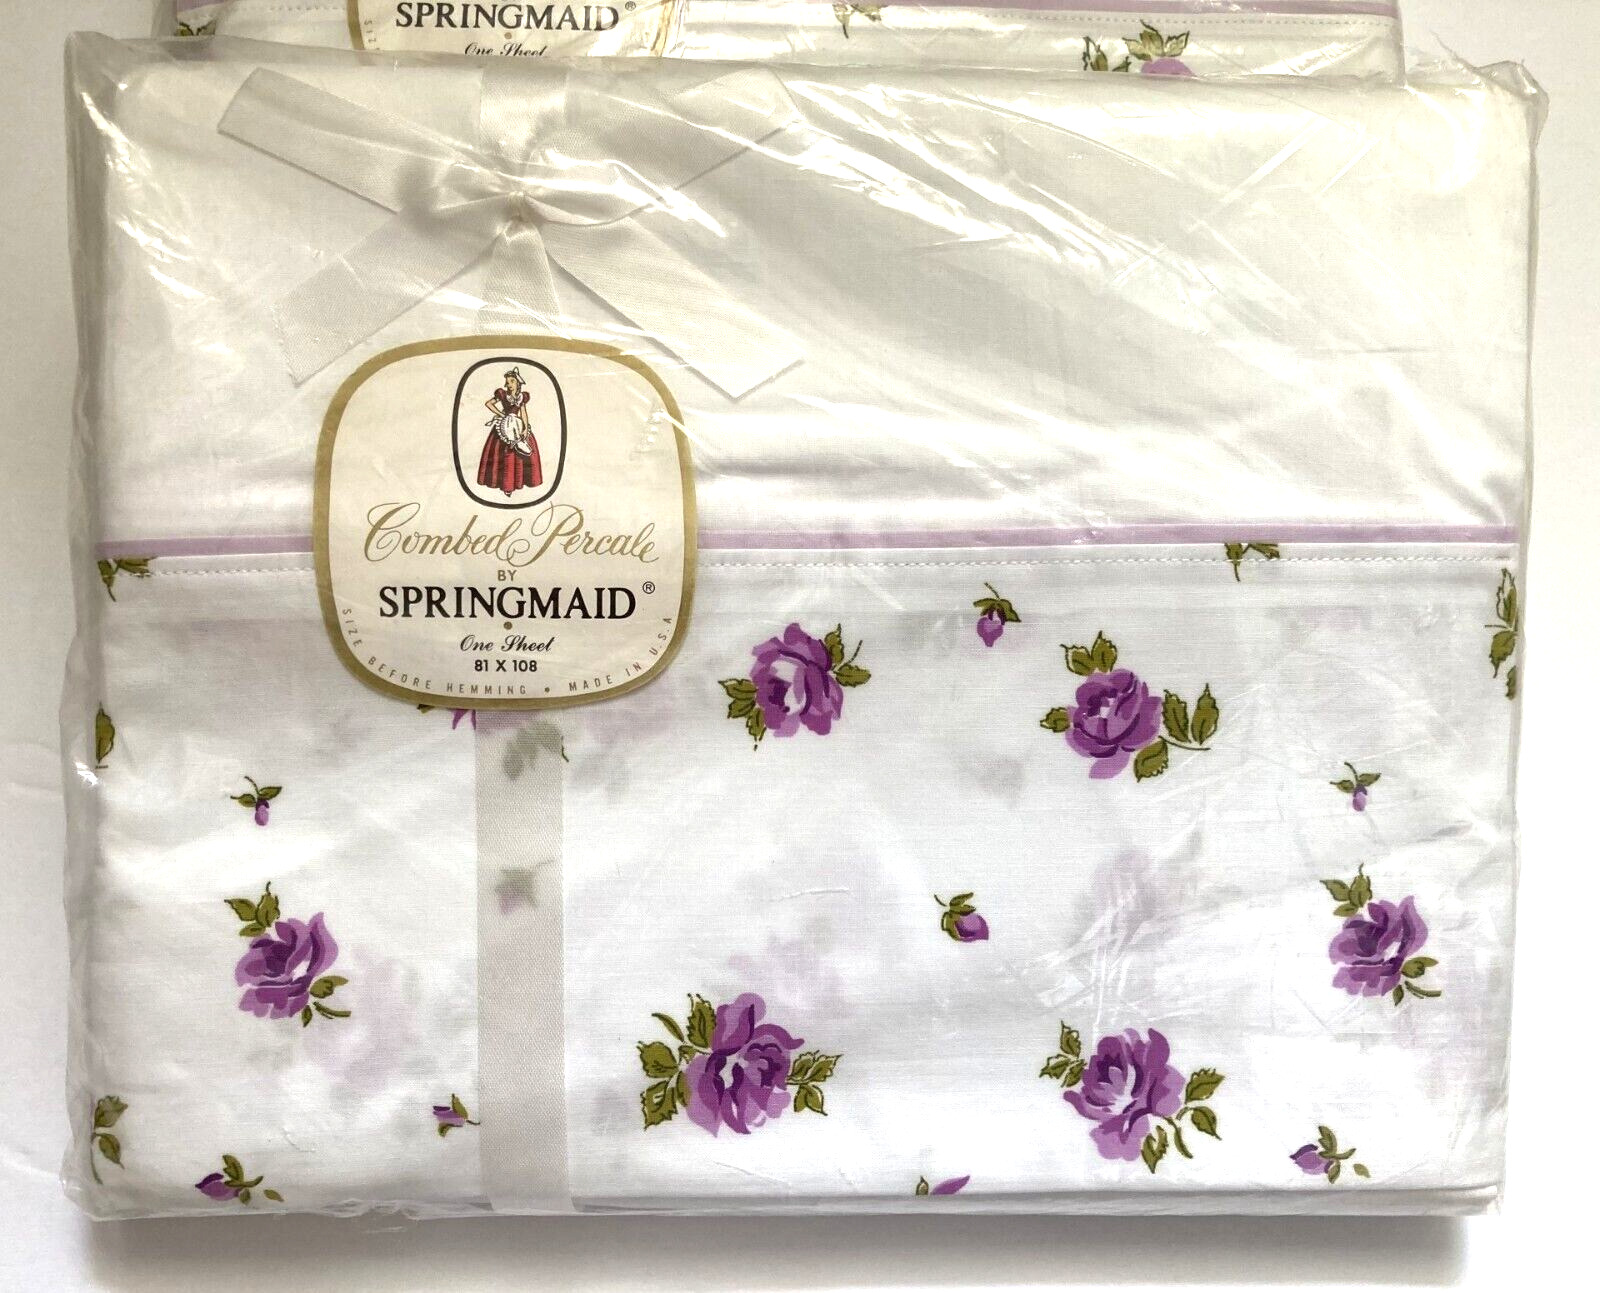 2 New Vtg Springmaid Combed Cotton Percale Purple Roses Full Flat Sheets 81x108